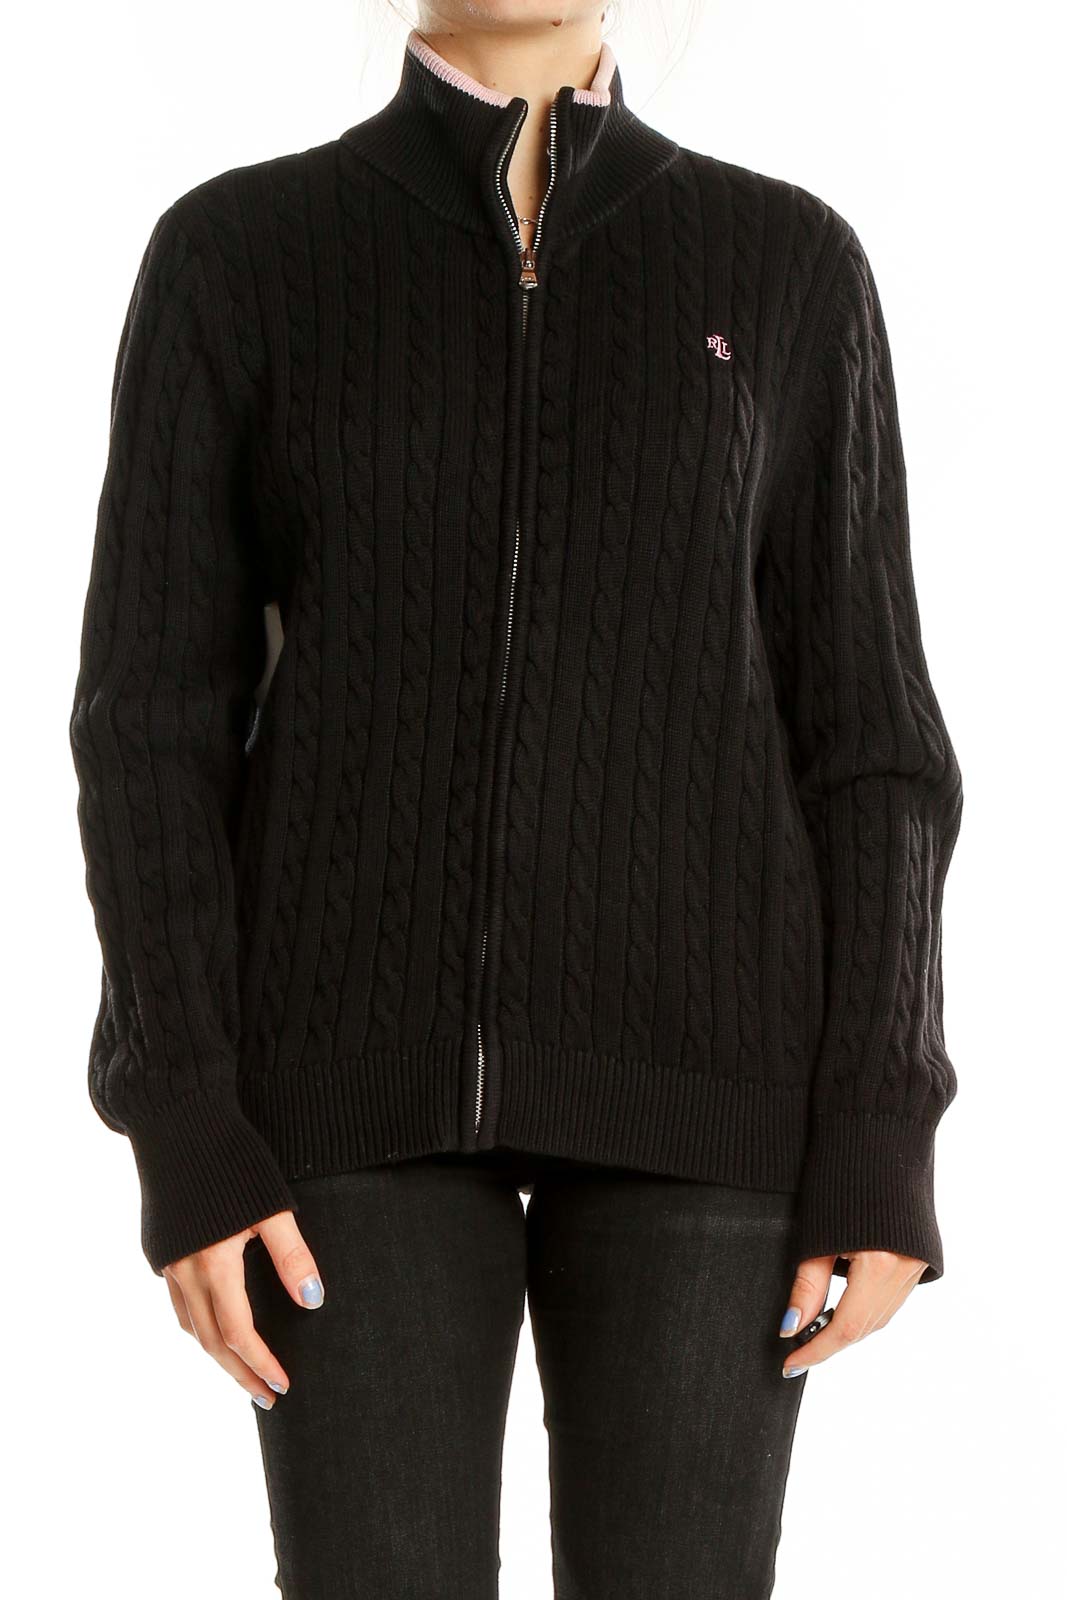 Black Cable Knit Zip Up Sweater Front